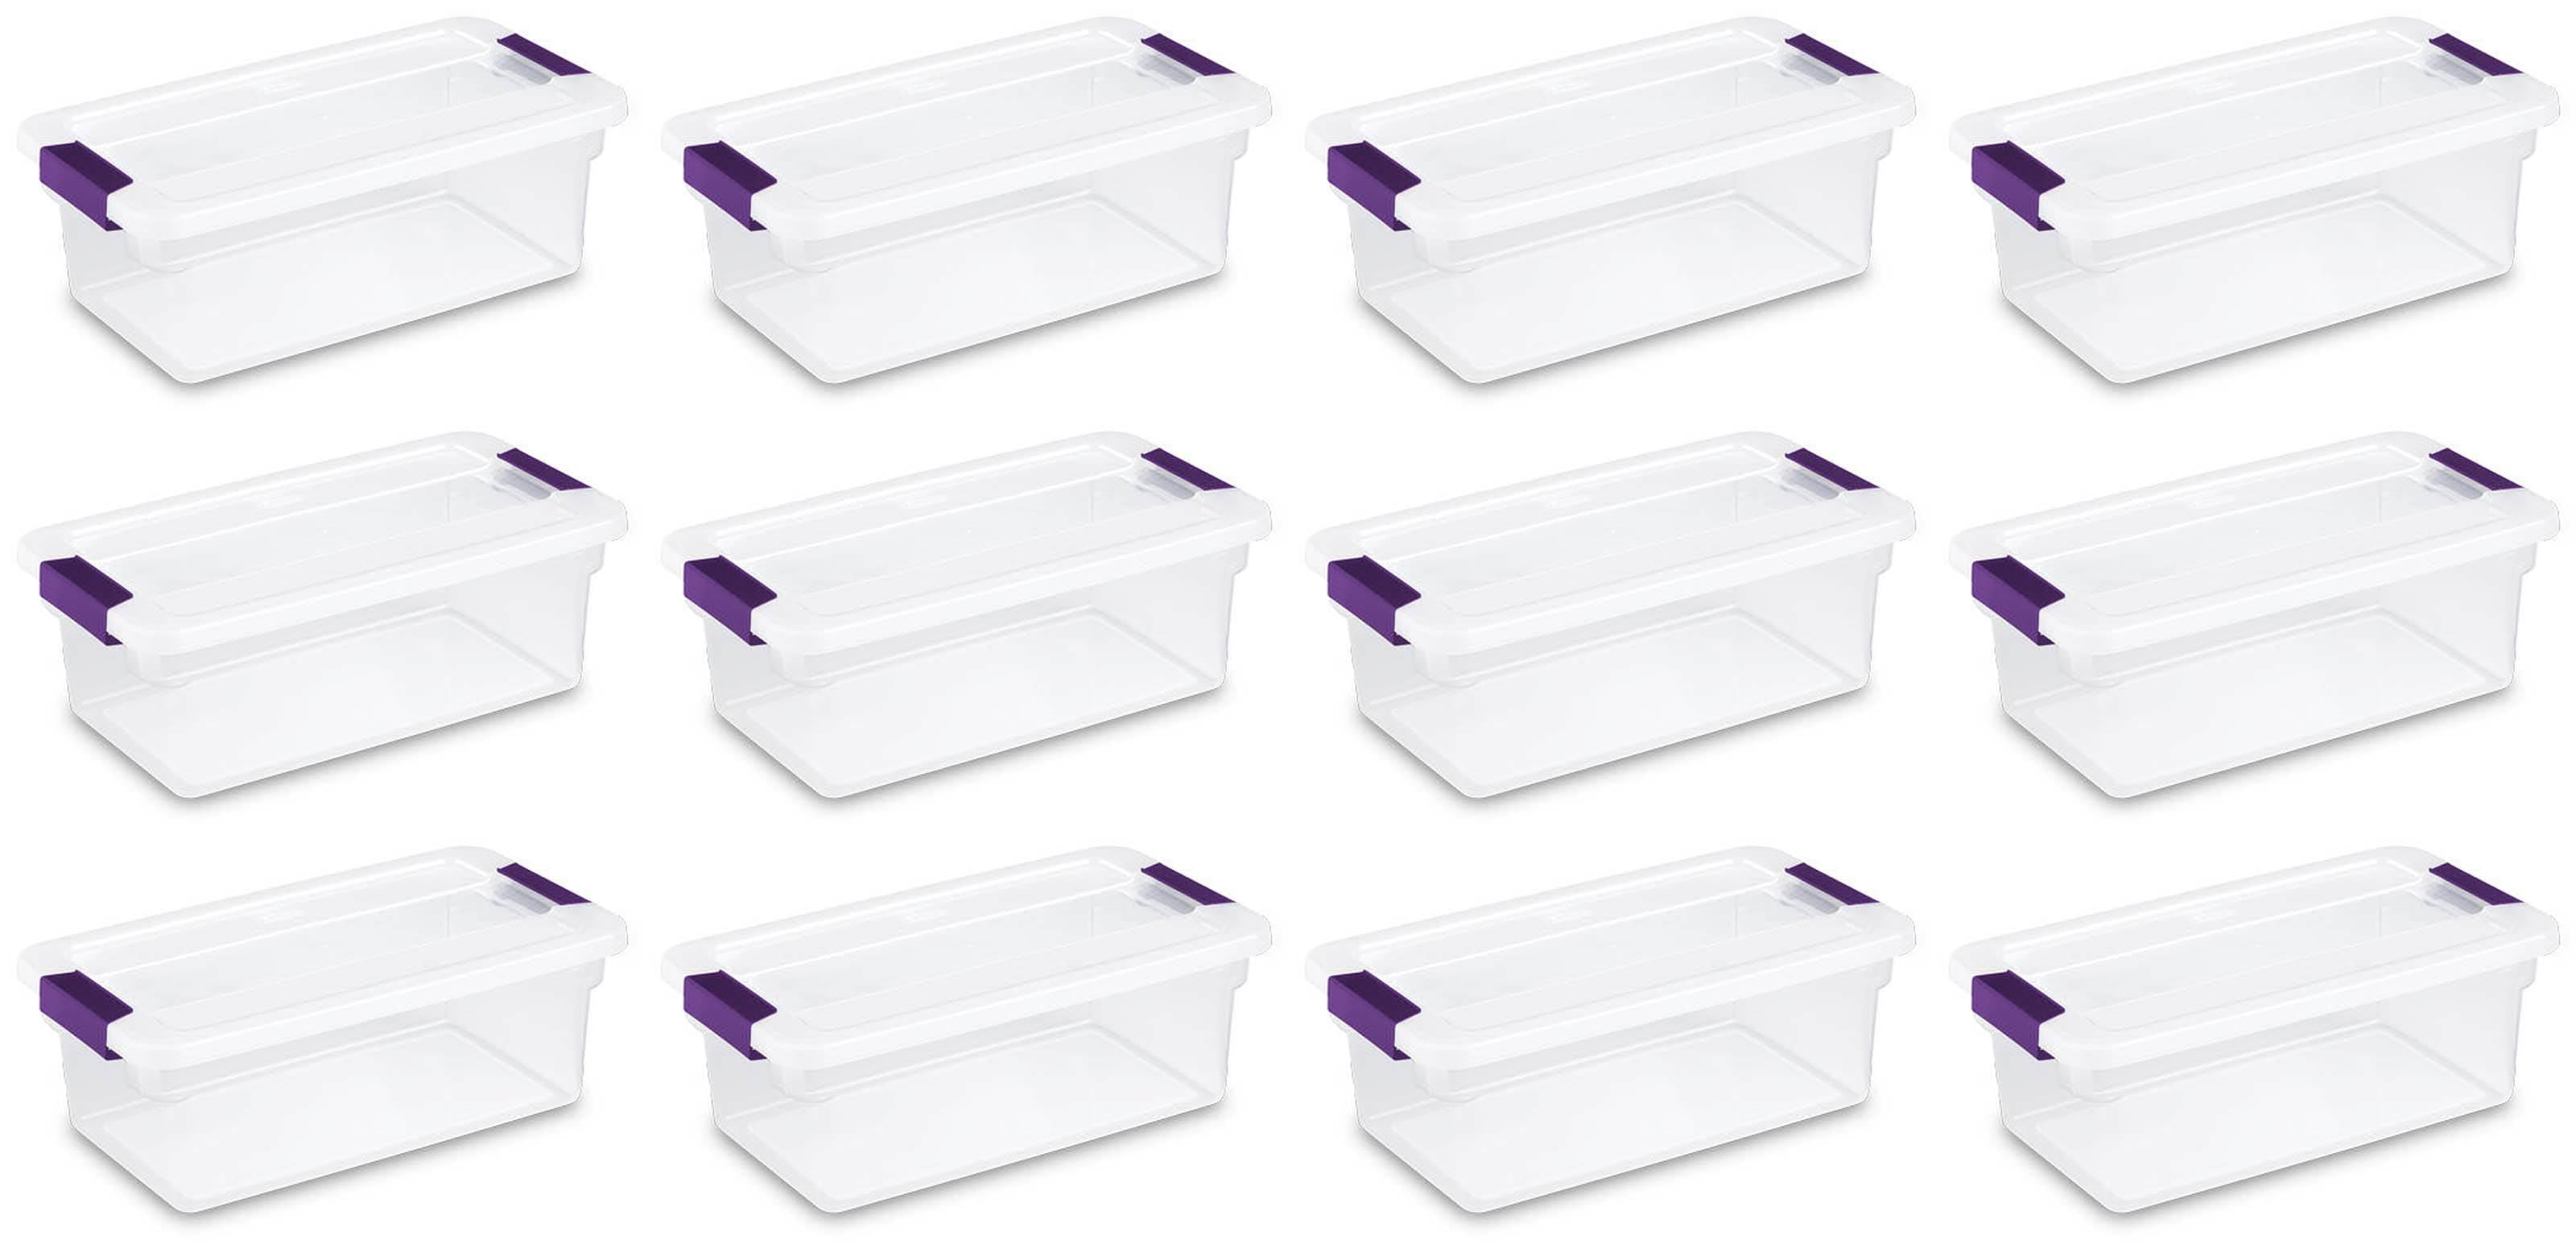 Sterilite 60 Quart ClearView Latch Lid Wheeled Underbed Storage Box, (16  Pack), 16pk - Pay Less Super Markets